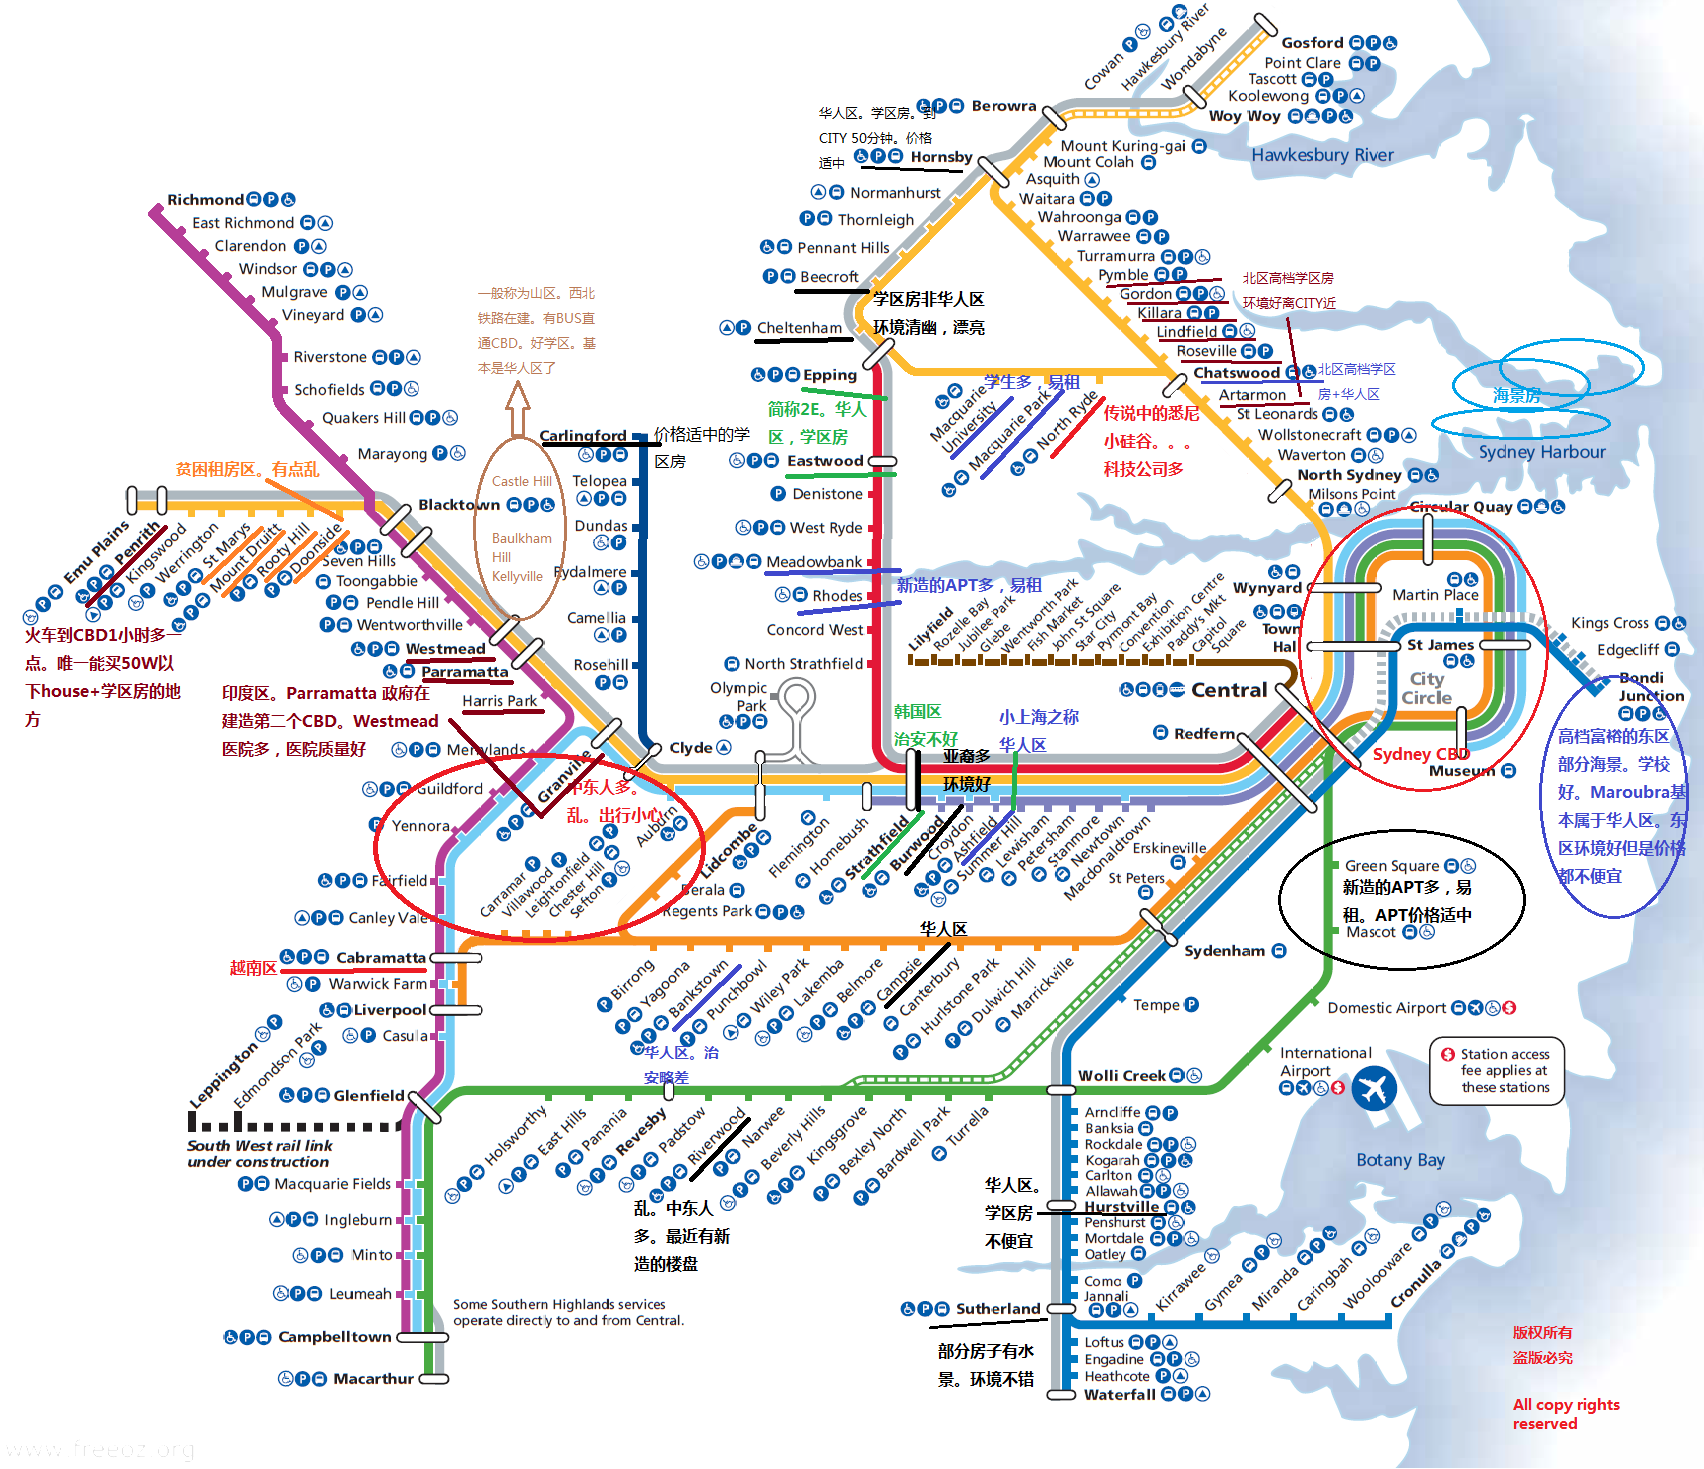 2013-02-21-cityrail-4-sector-speculative-map Edited Version.png